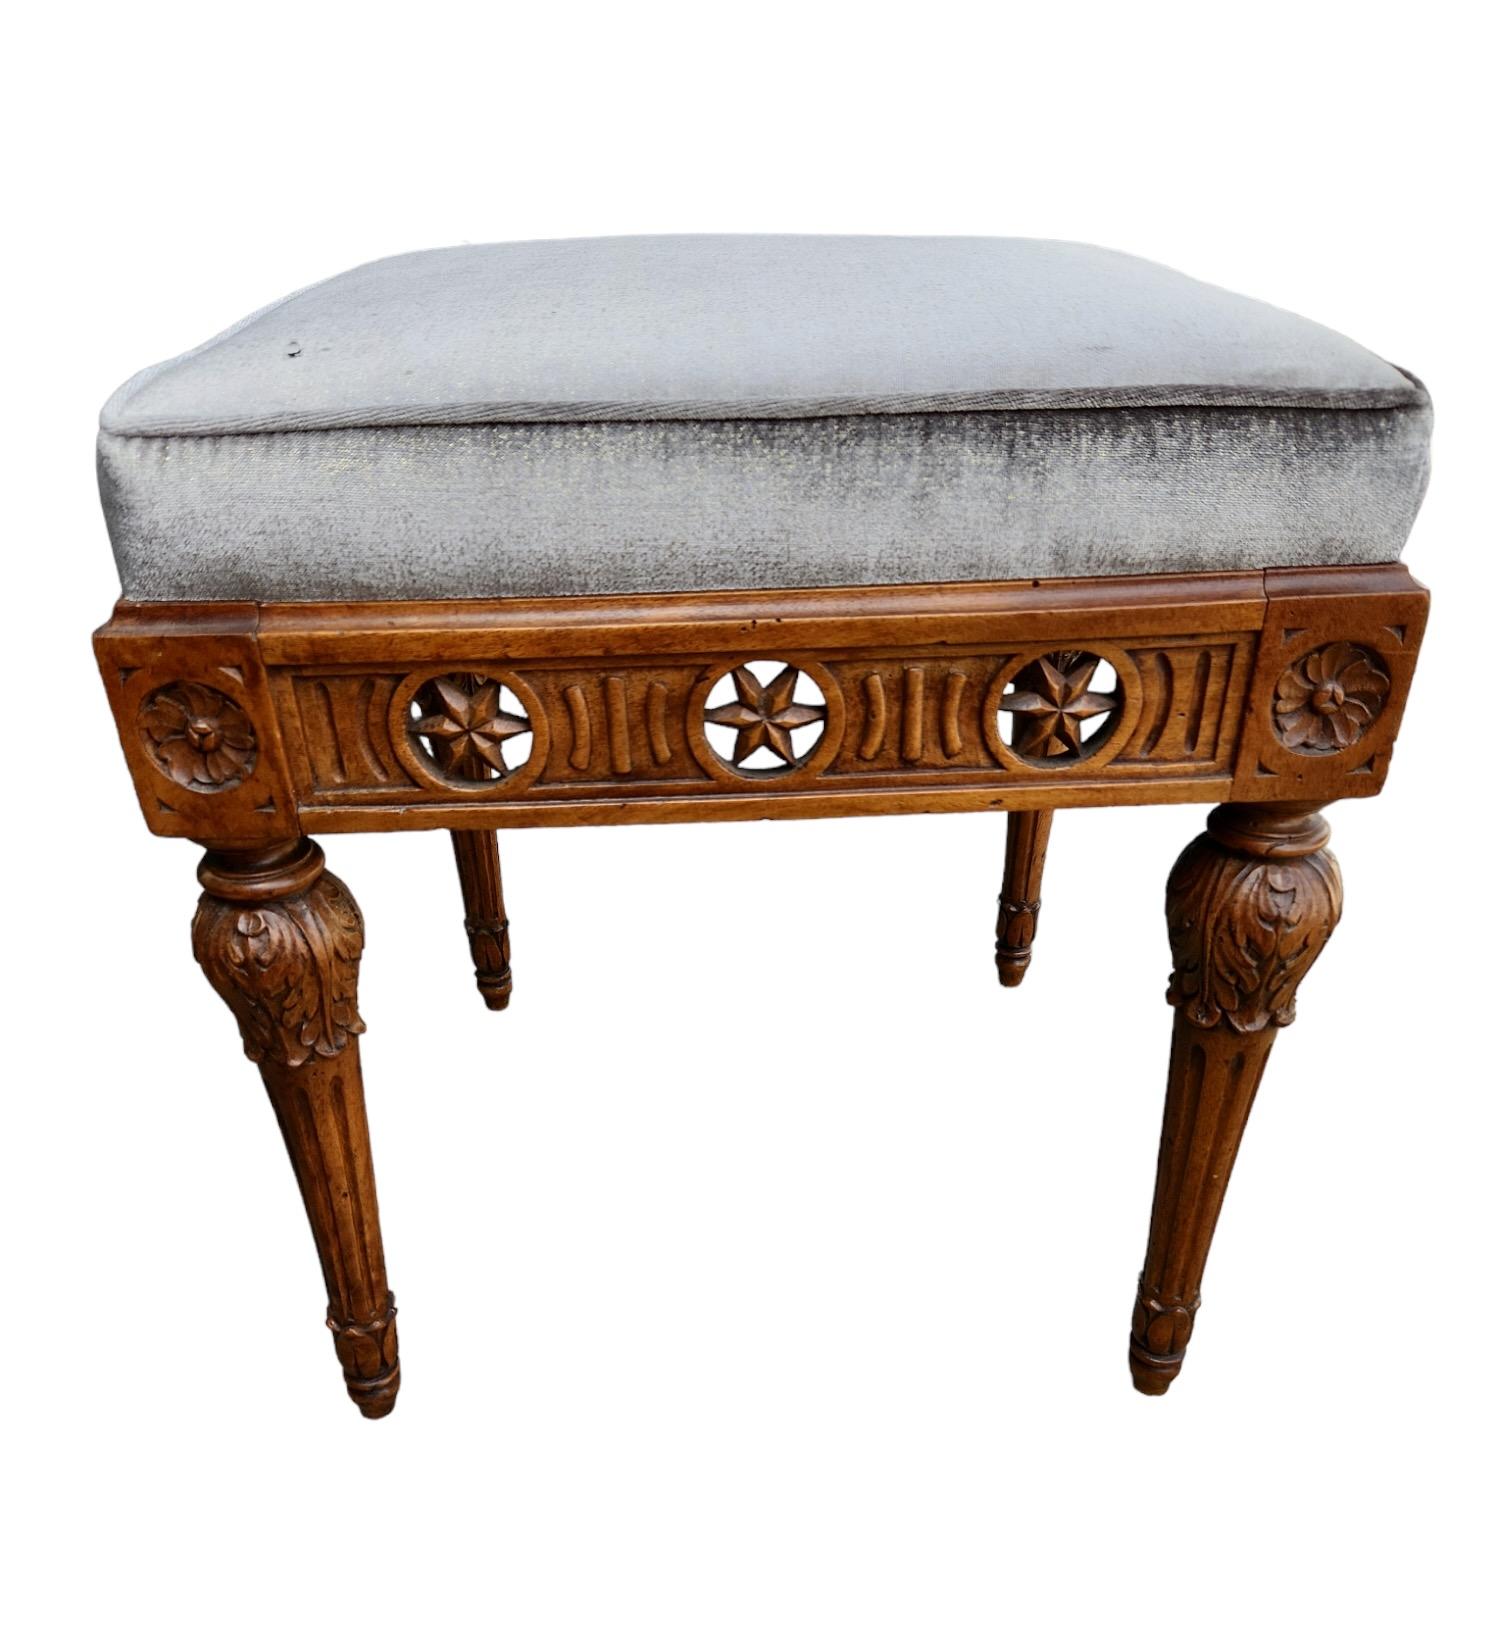 Finely carved 19th century Italian Walnut benches. Newly upholstered in a glamorous silk velvet with a dusting of gold in the fabric. Strong and sturdy.